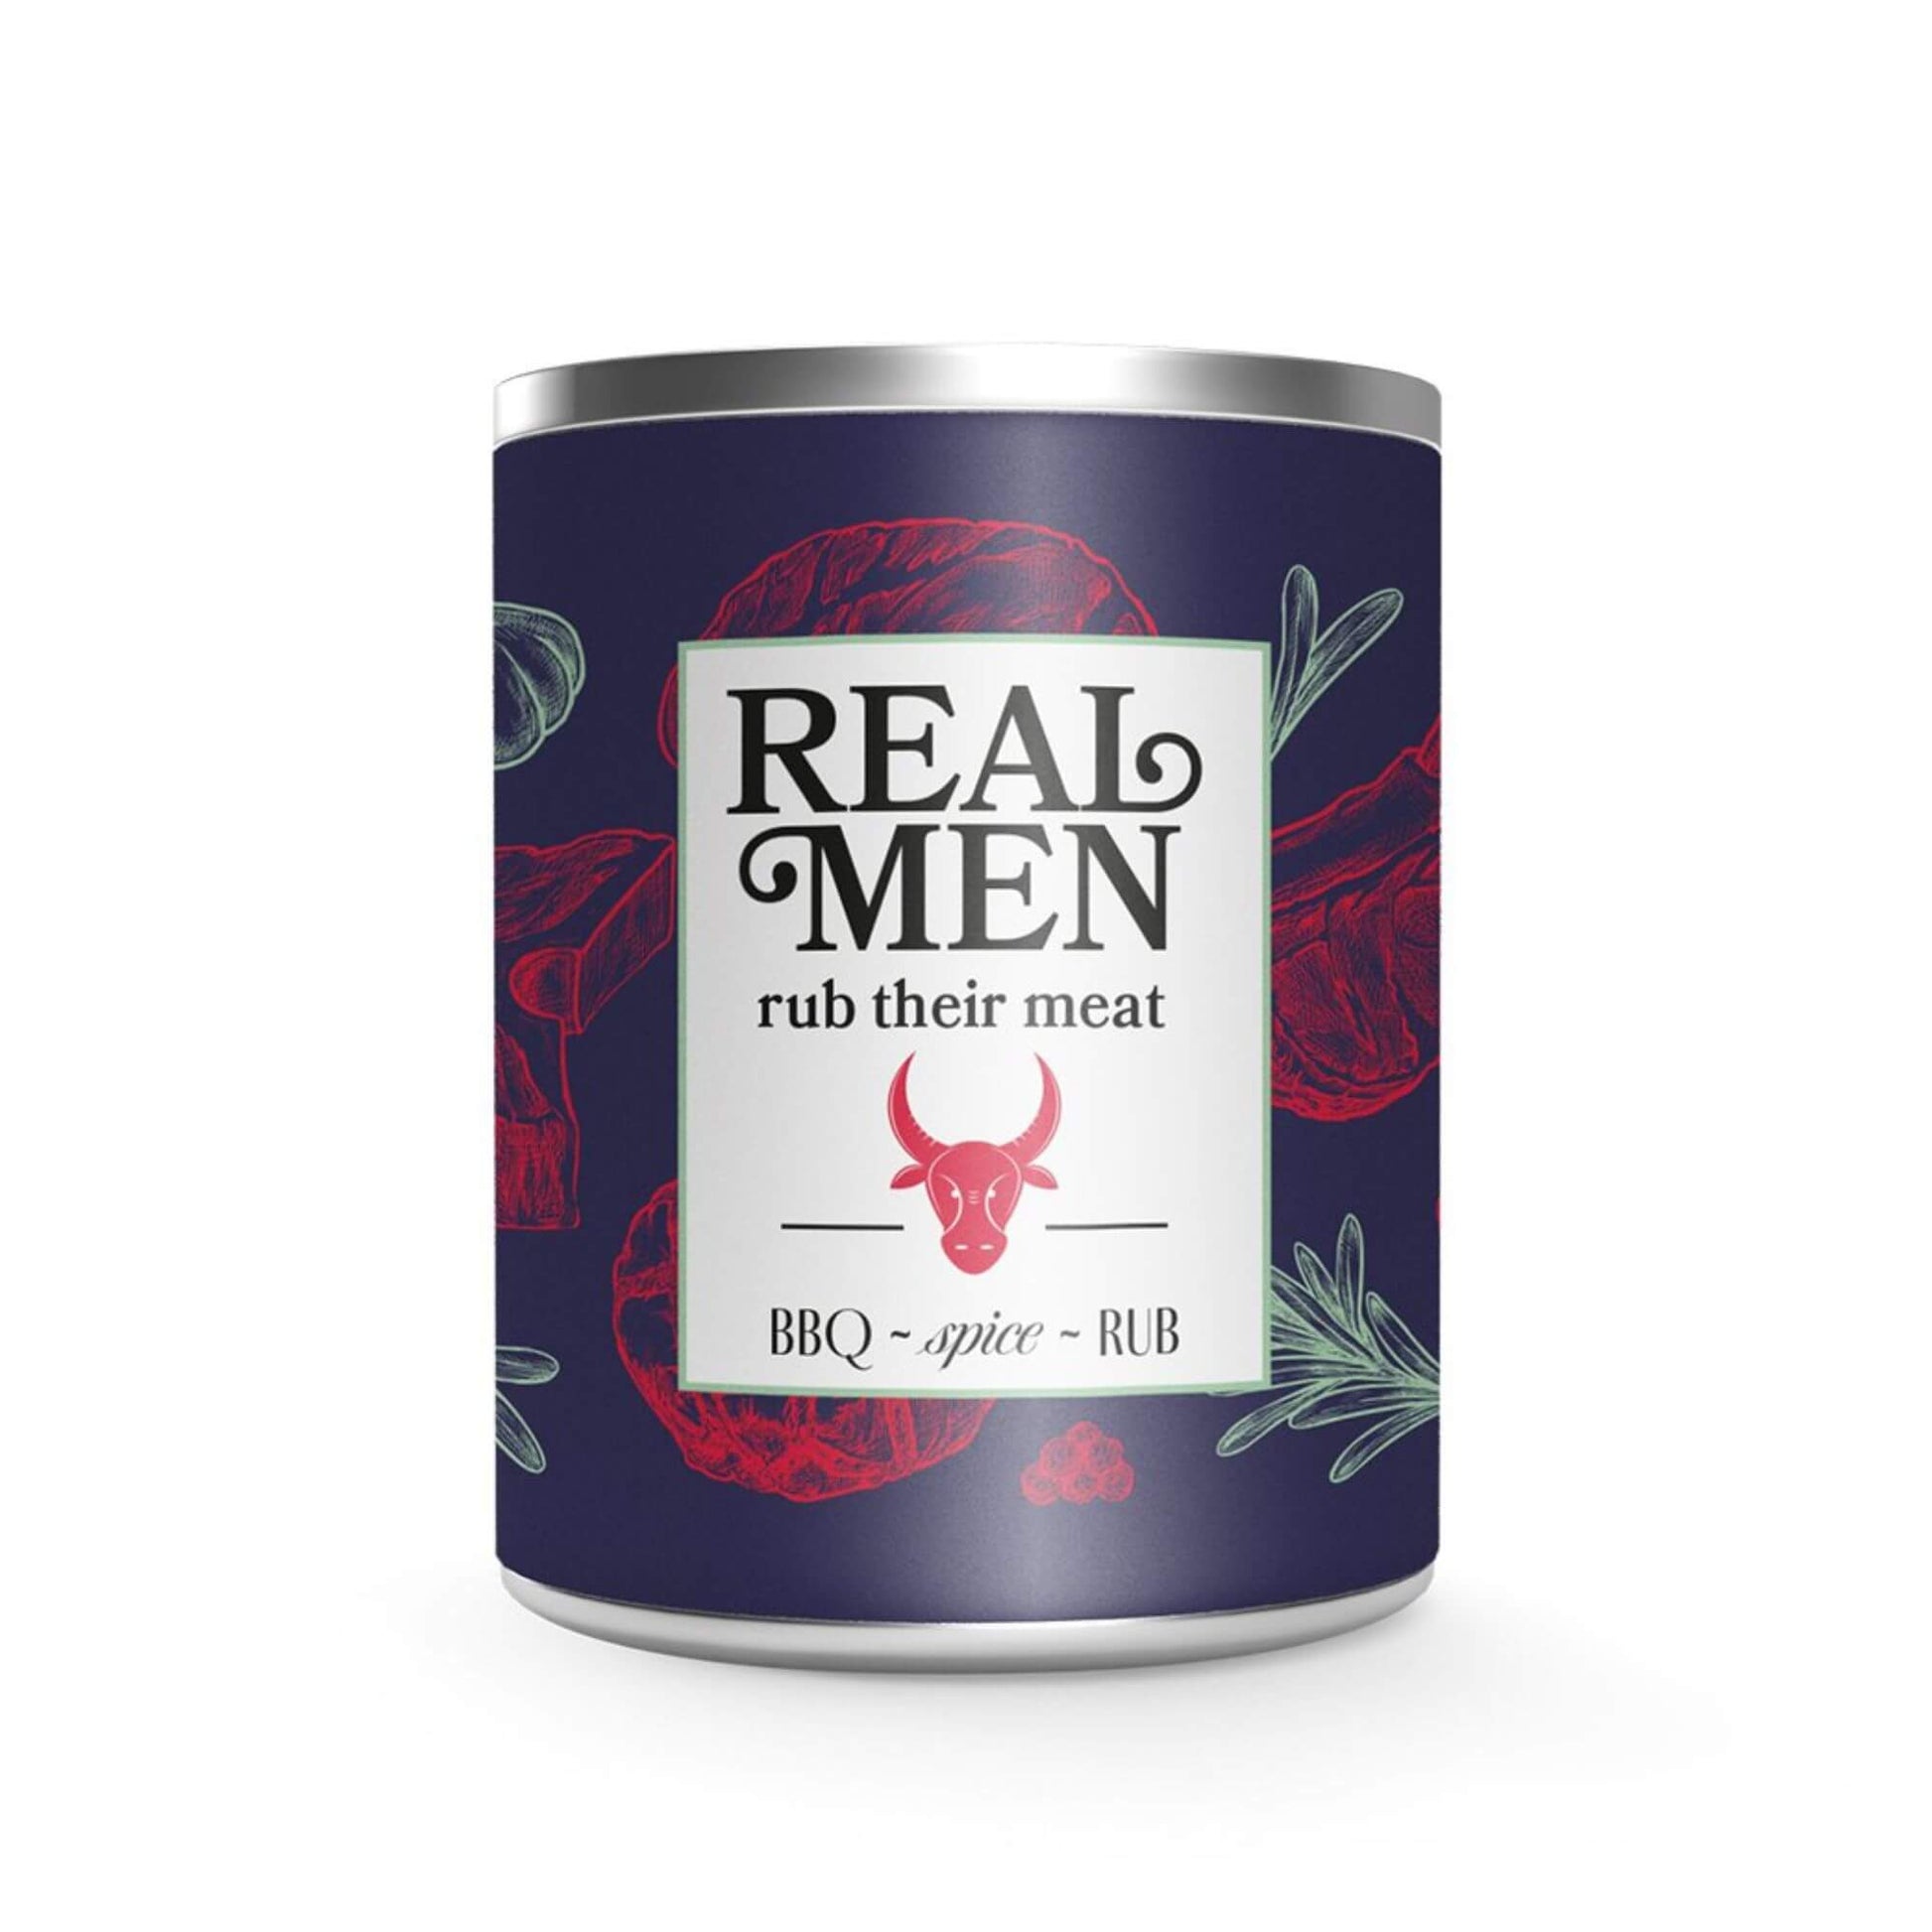 Barbecue kruidenmix in cadeaublik "Real men rub their meat"